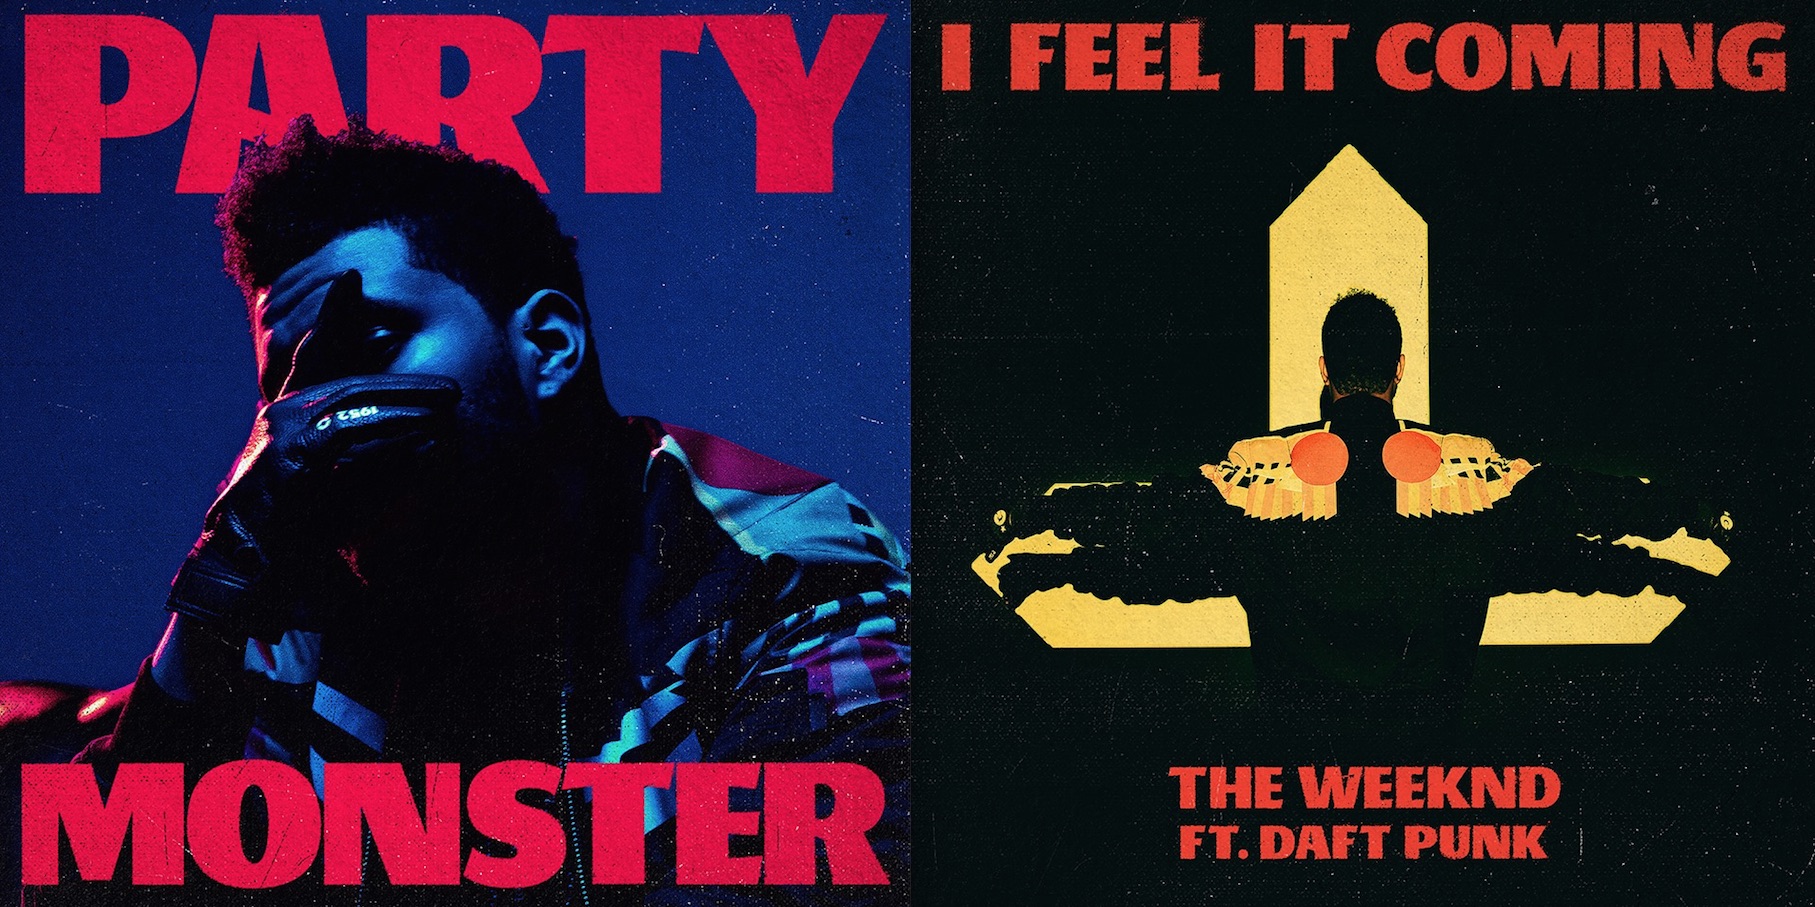 Feeling coming down. The Weeknd Daft Punk i feel it coming. Weeknd feel it coming. The Weeknd плакат. Party Monster the Weeknd обложка.